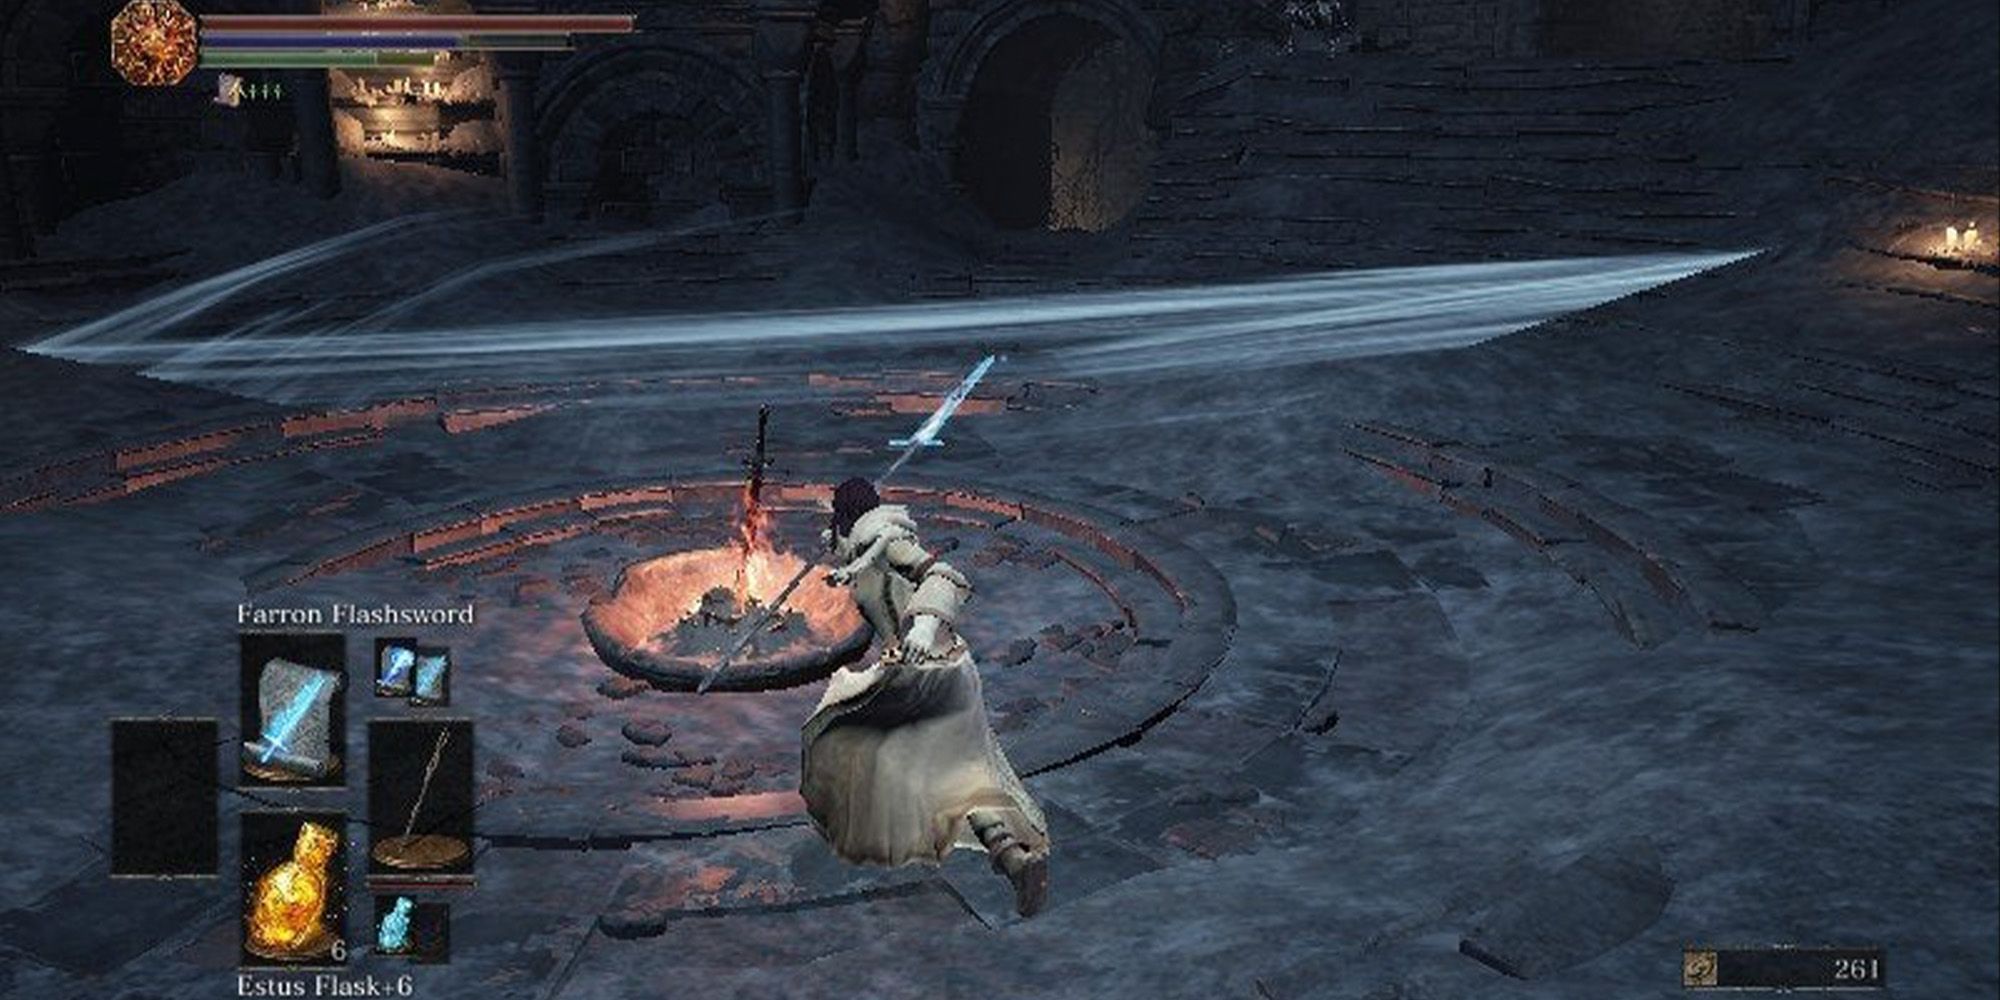 a sorcerer using the Farron Flashsword spell with a long Catalyst